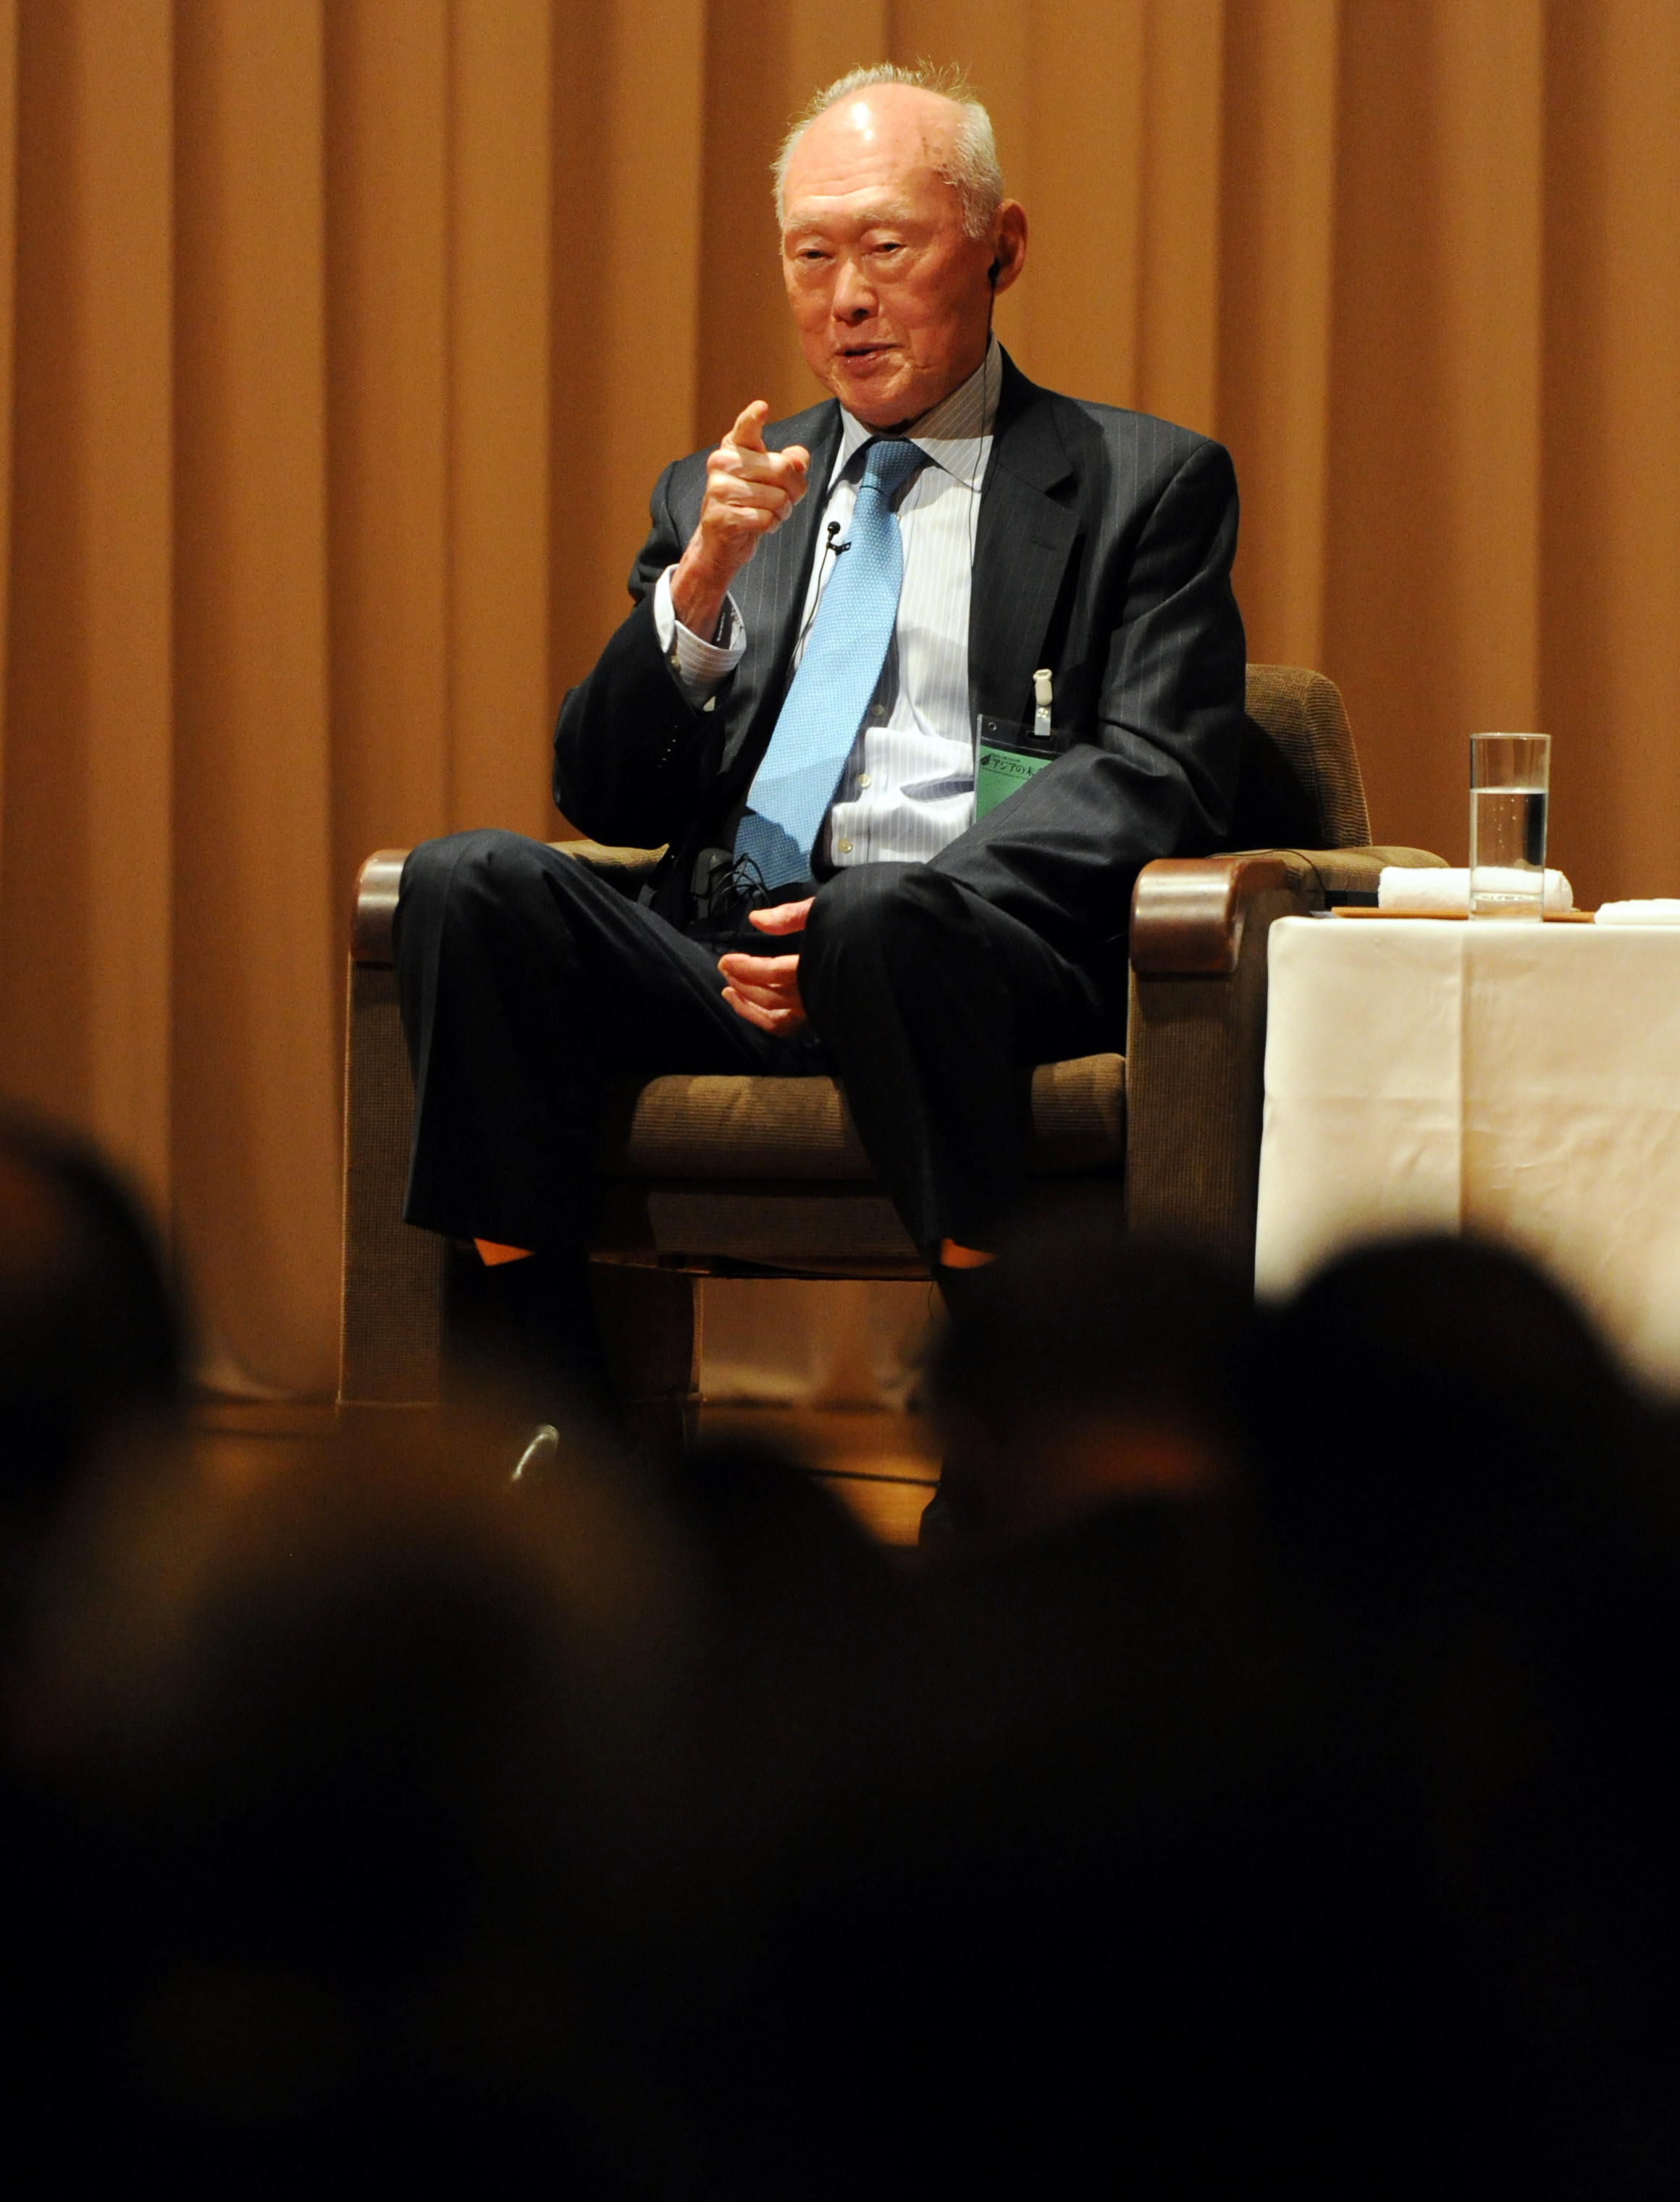 Lee Kuan Yew at the 17th International Conference on the Future of Asia in Tokyo in 2011. Photo: AFP